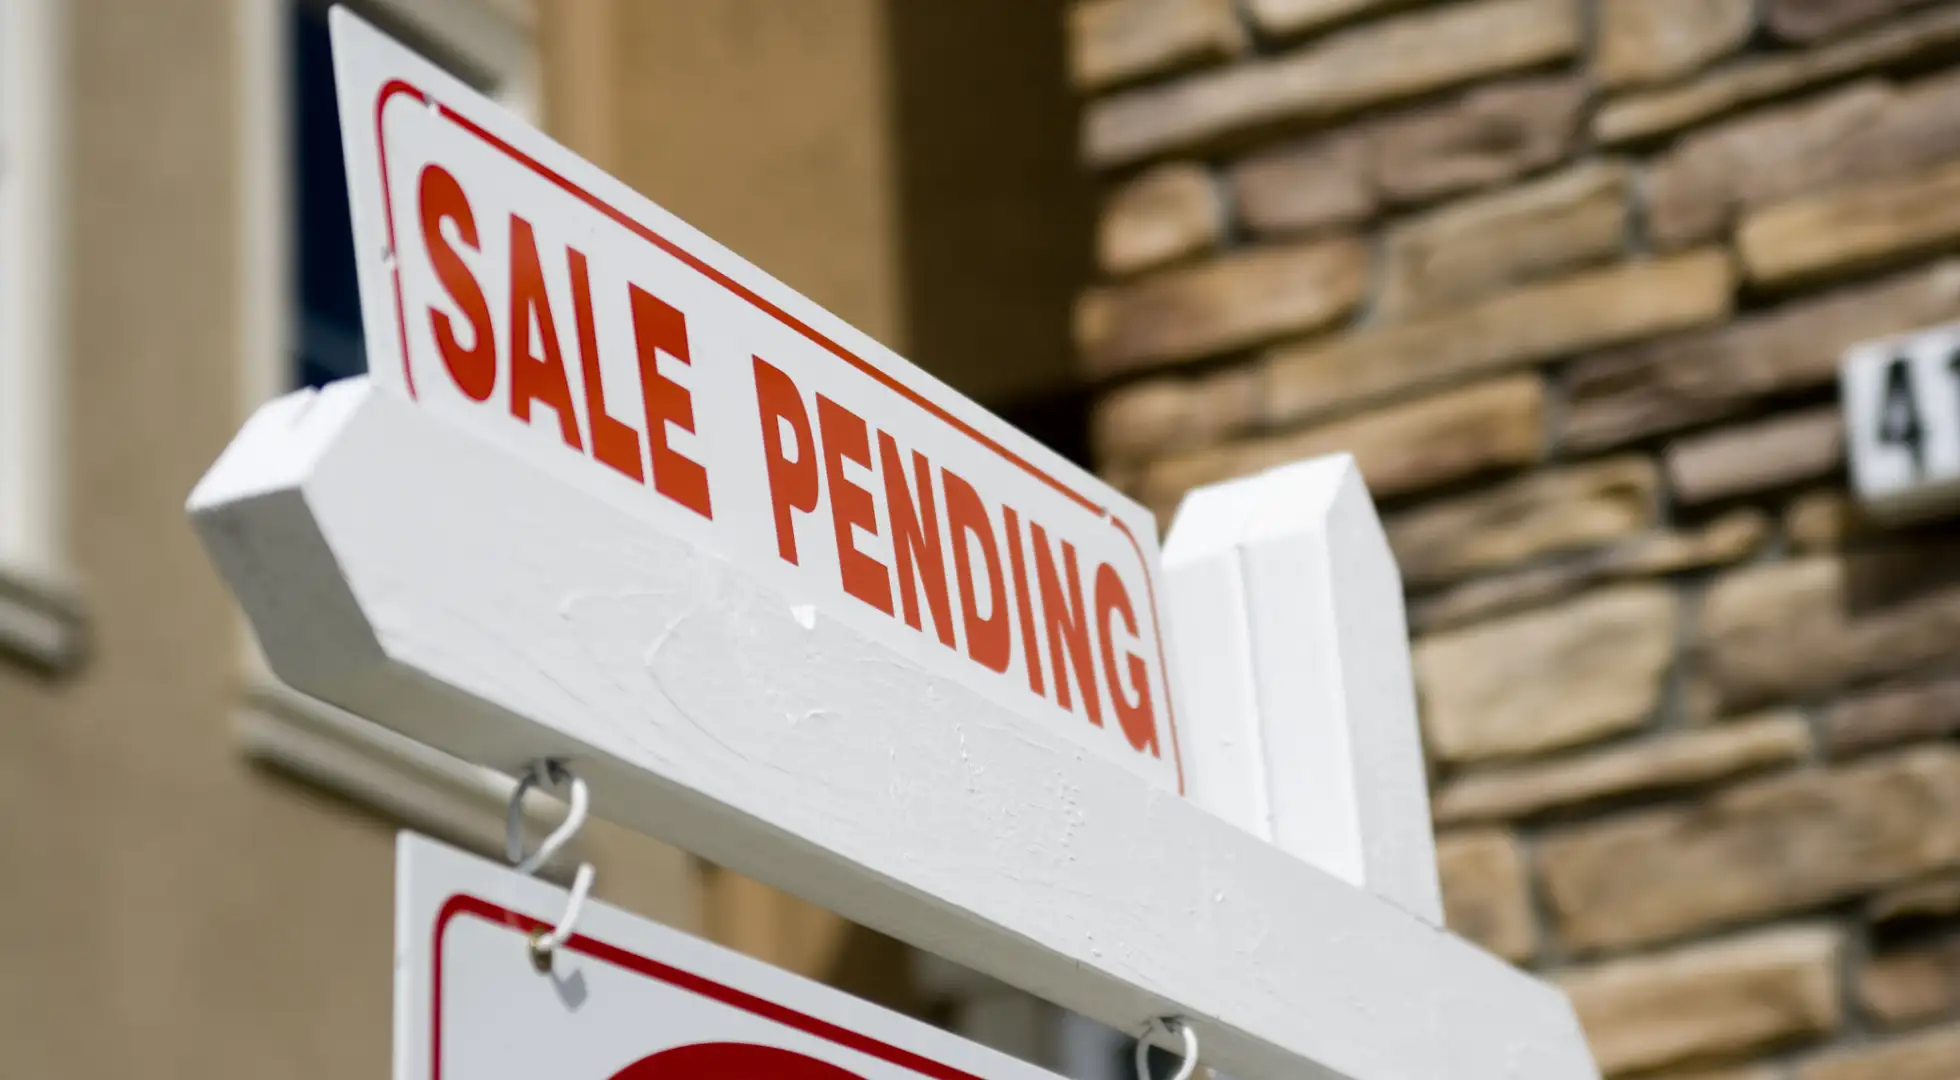 pending home sale sign